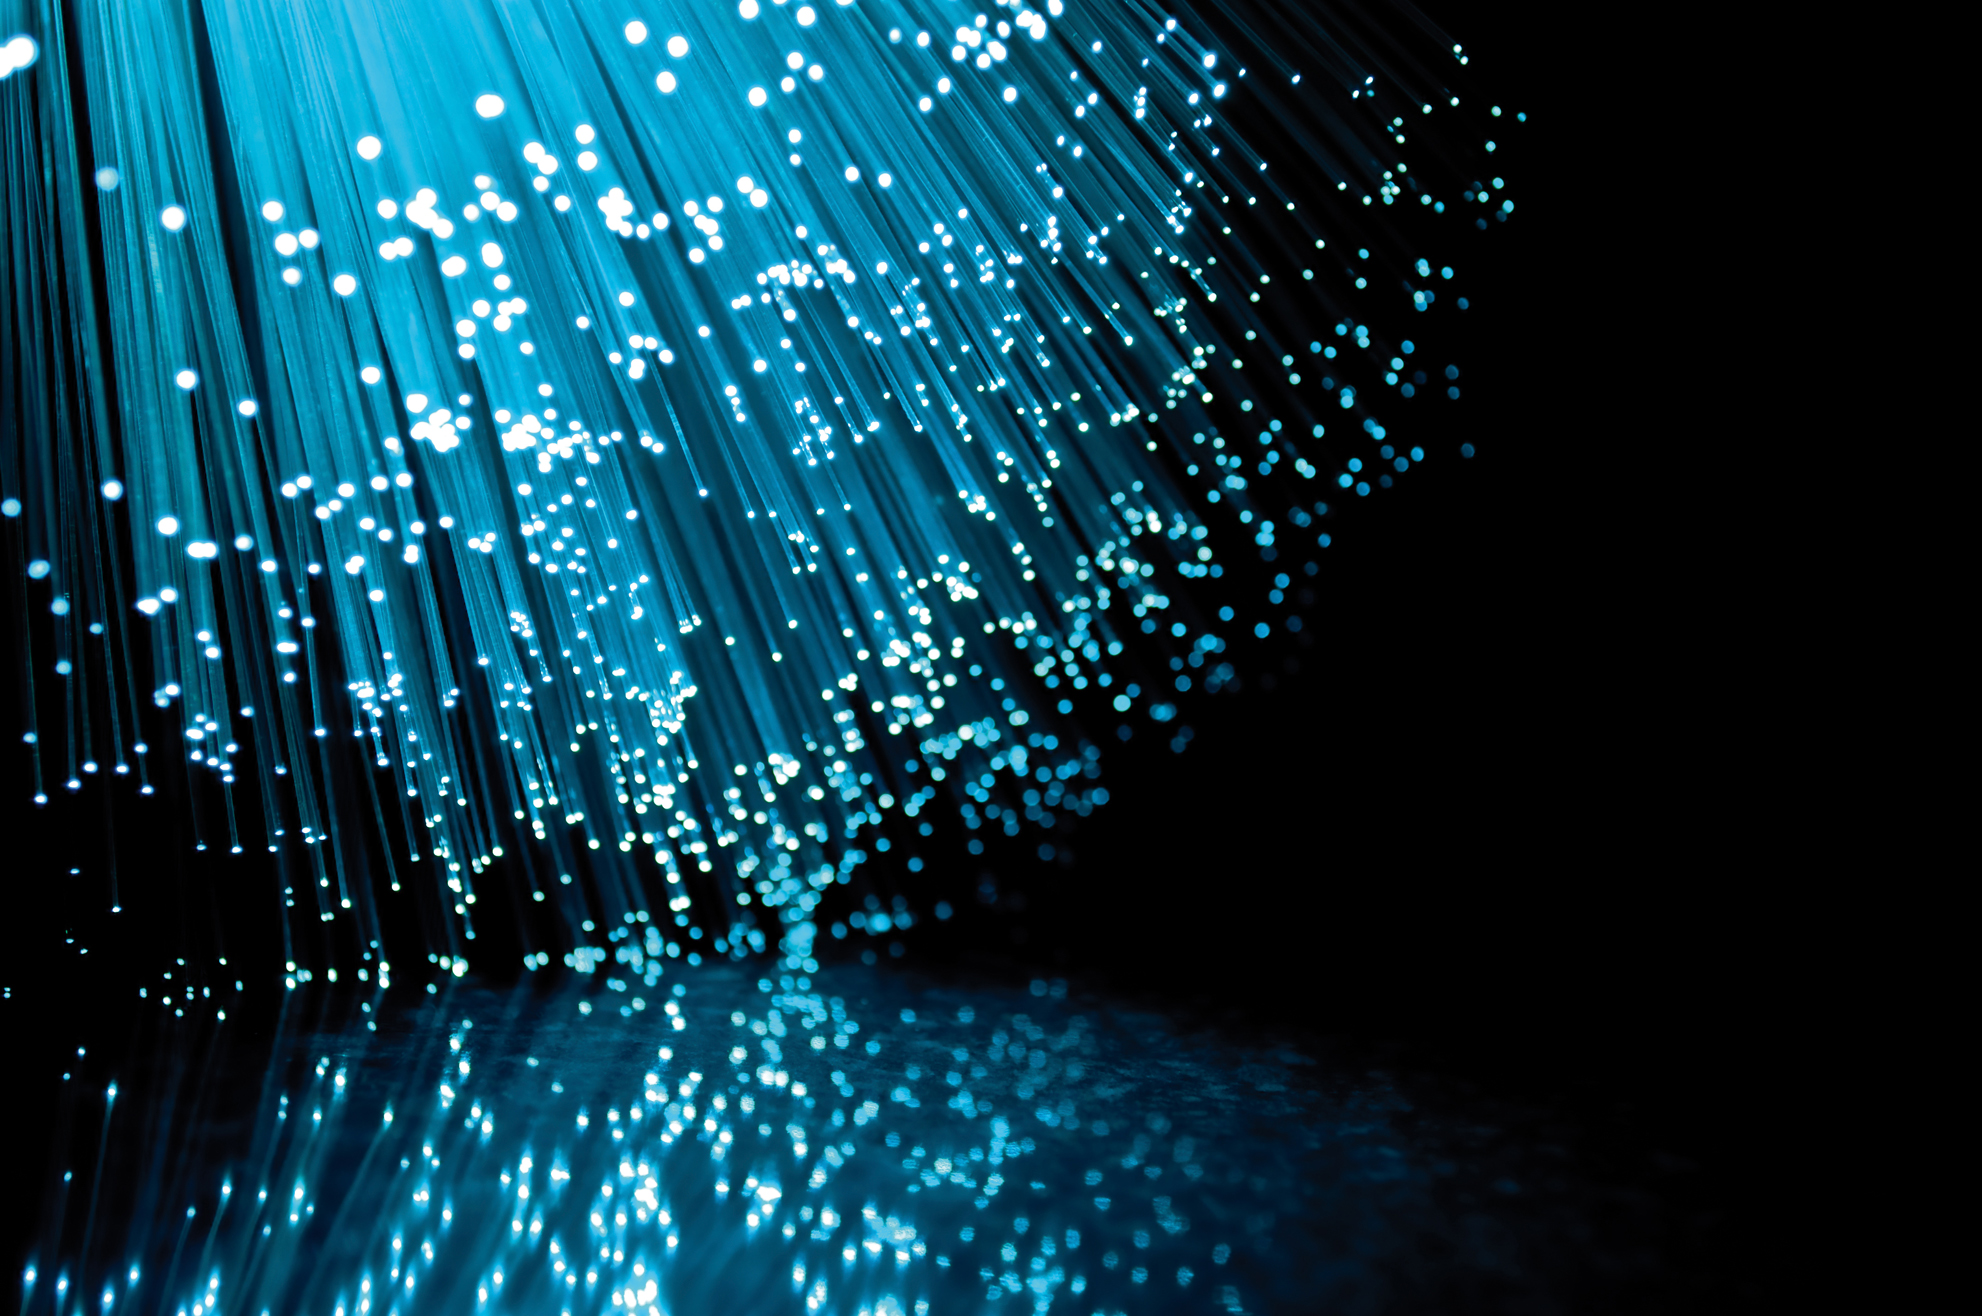 Fibre optic cable capacity can be increased | News